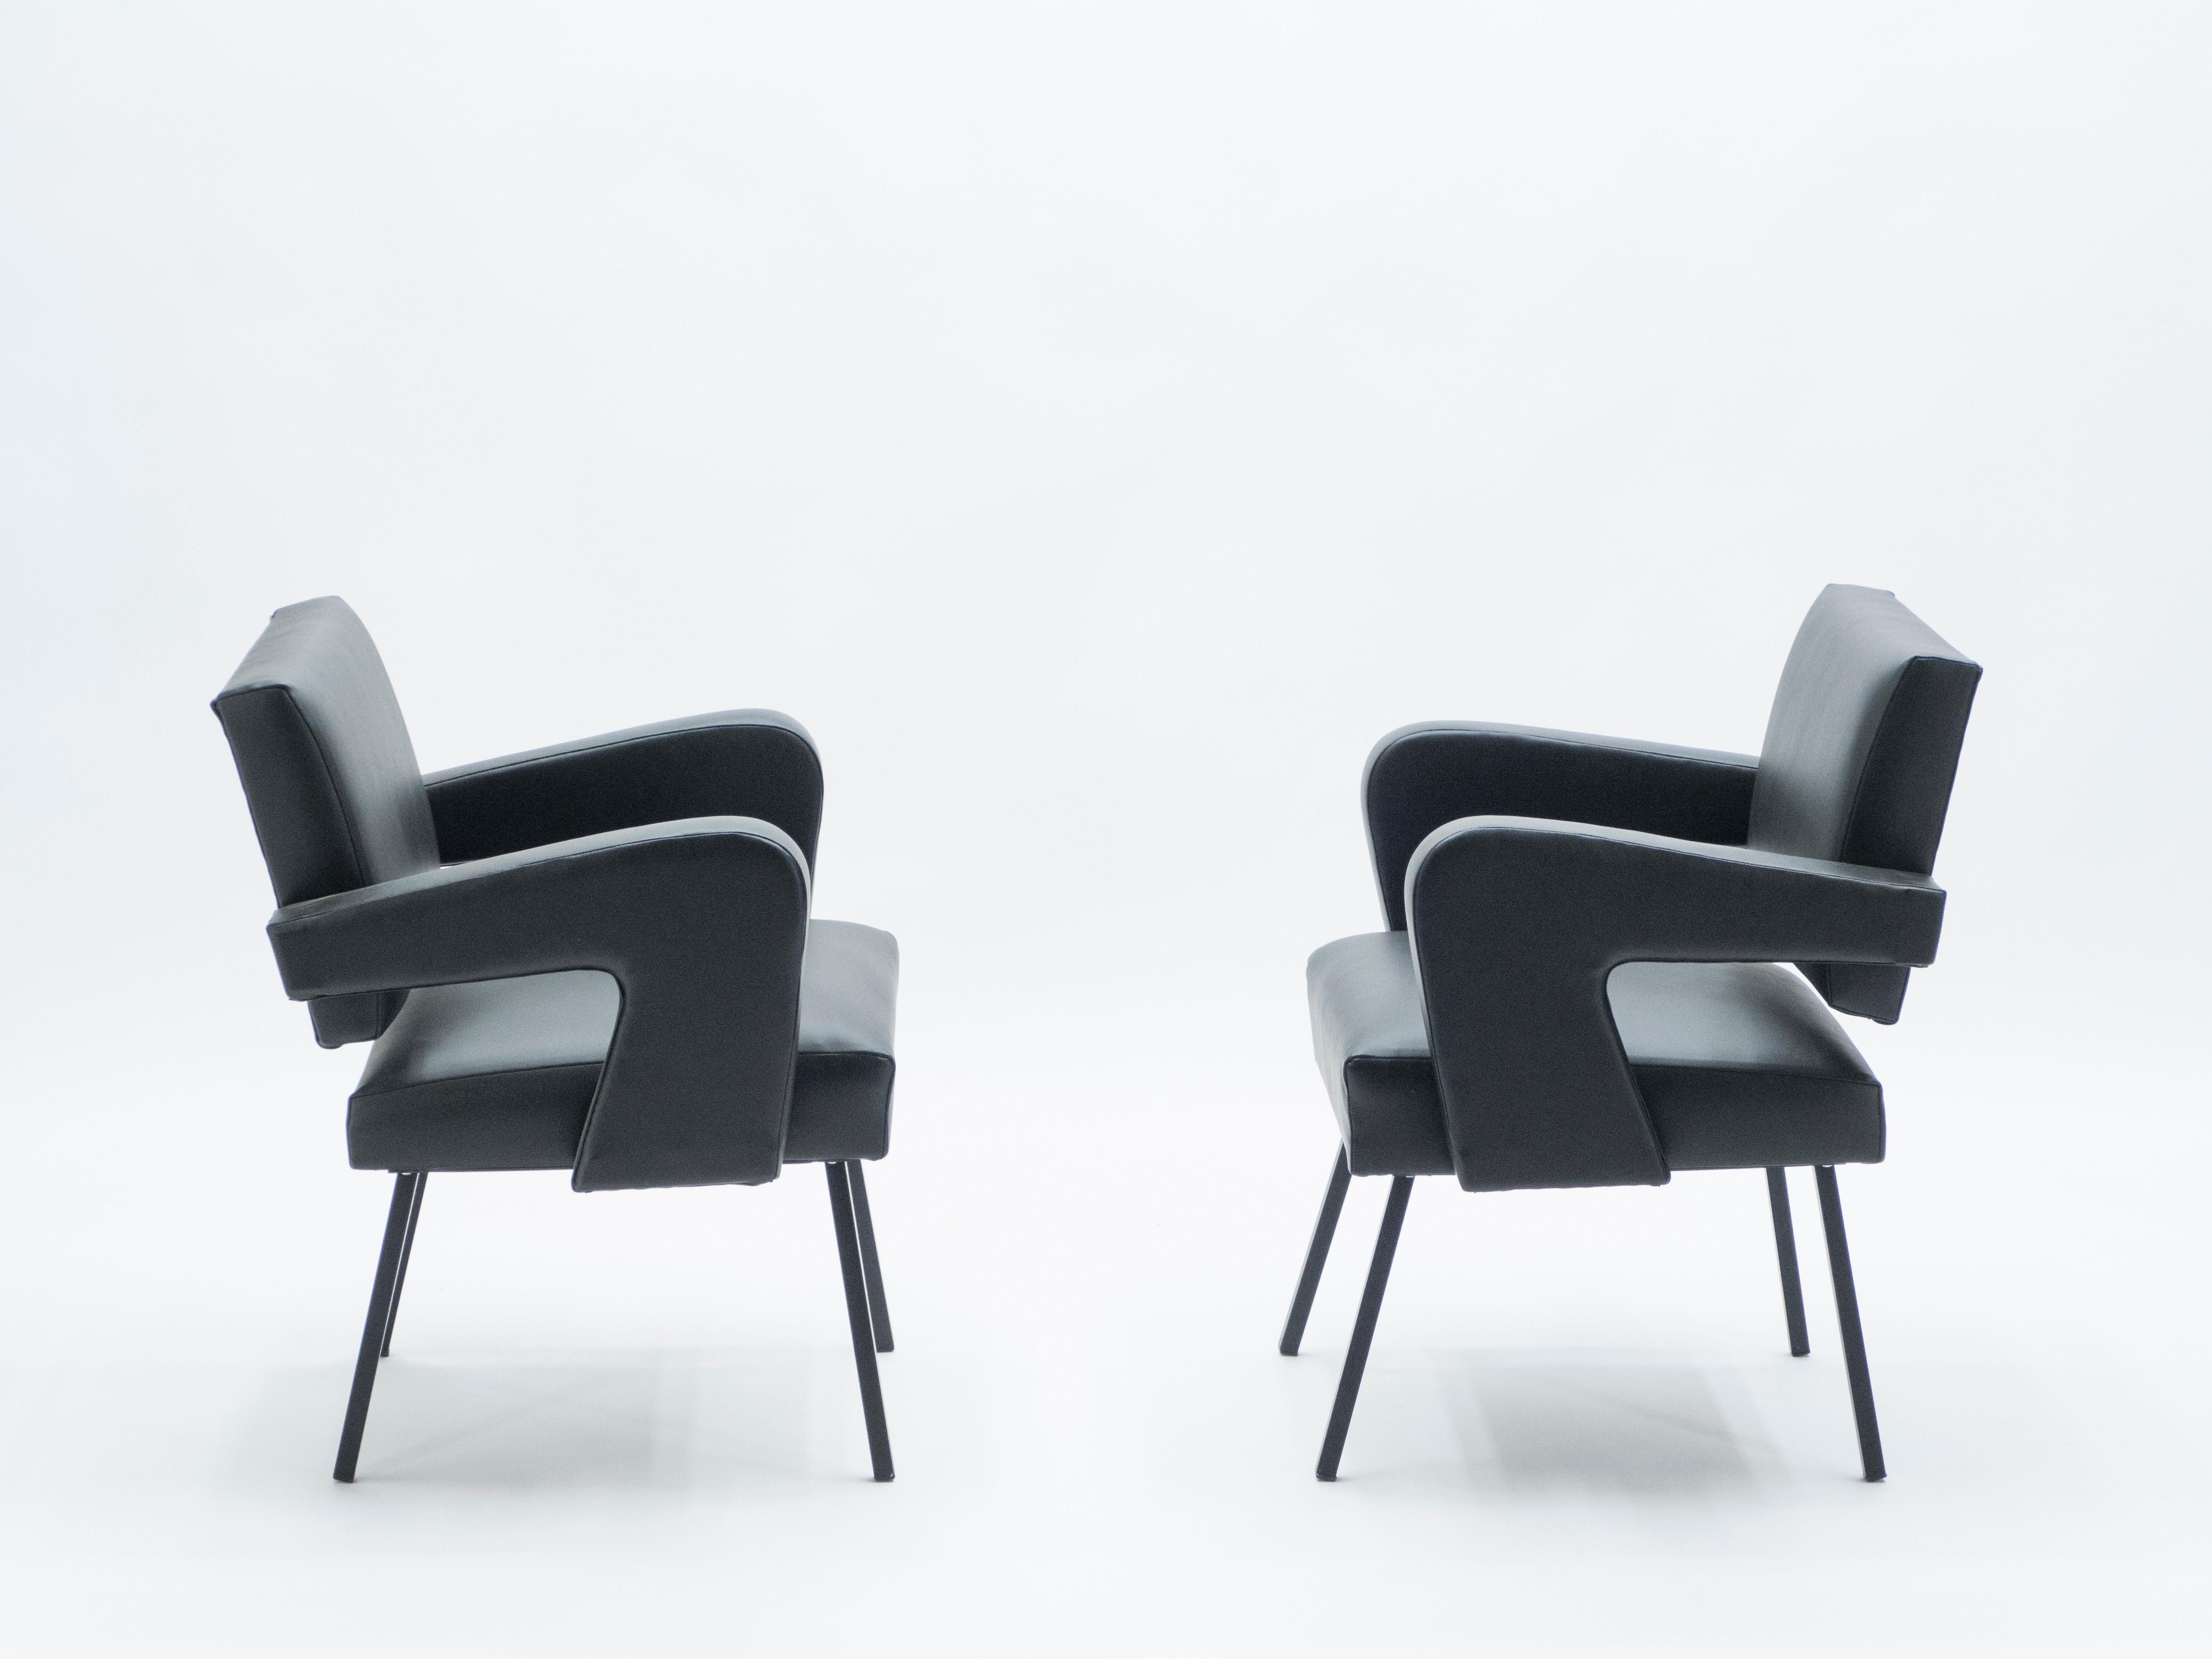 French Pair of Jacques Adnet “President” Leatherette Armchairs, 1959